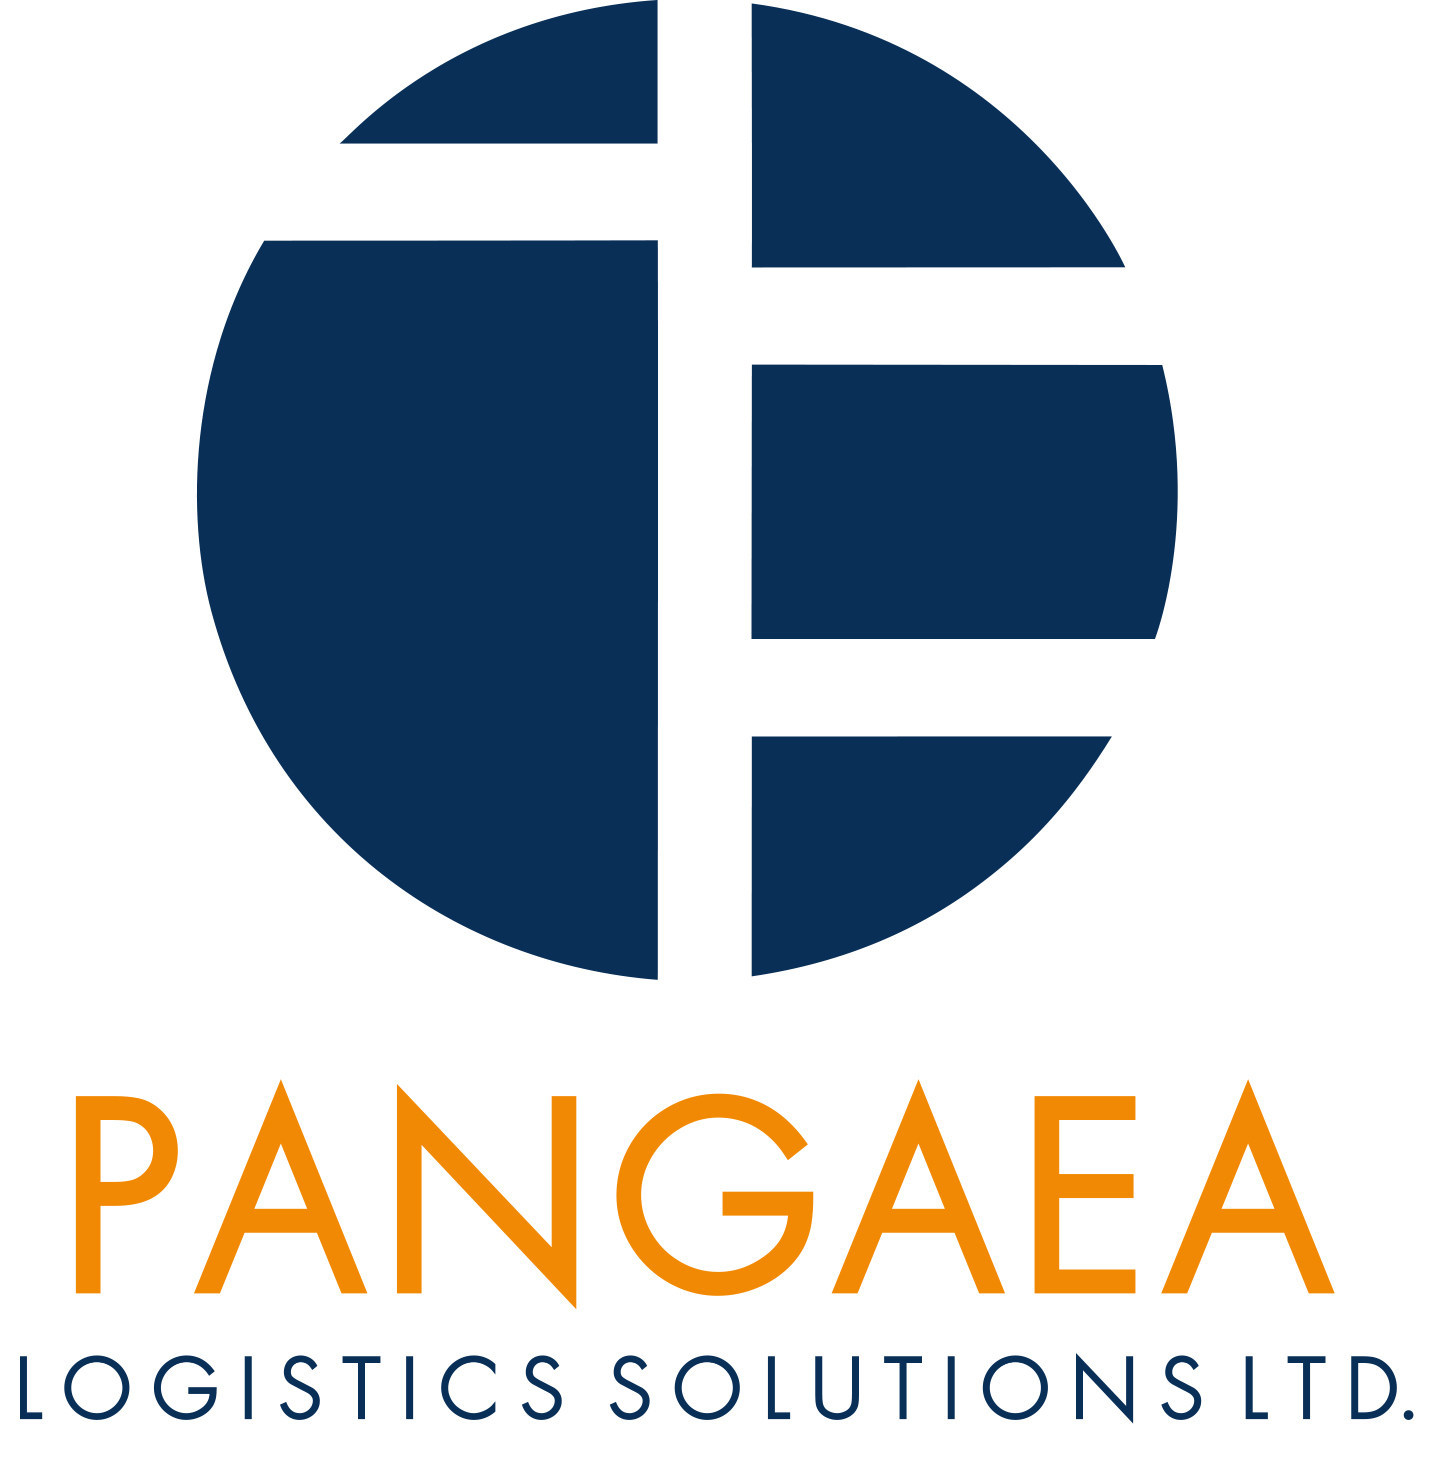 Pangaea Logistics Solutions Ltd. Reports Financial Results for the Quarter Ended September 30, 2019